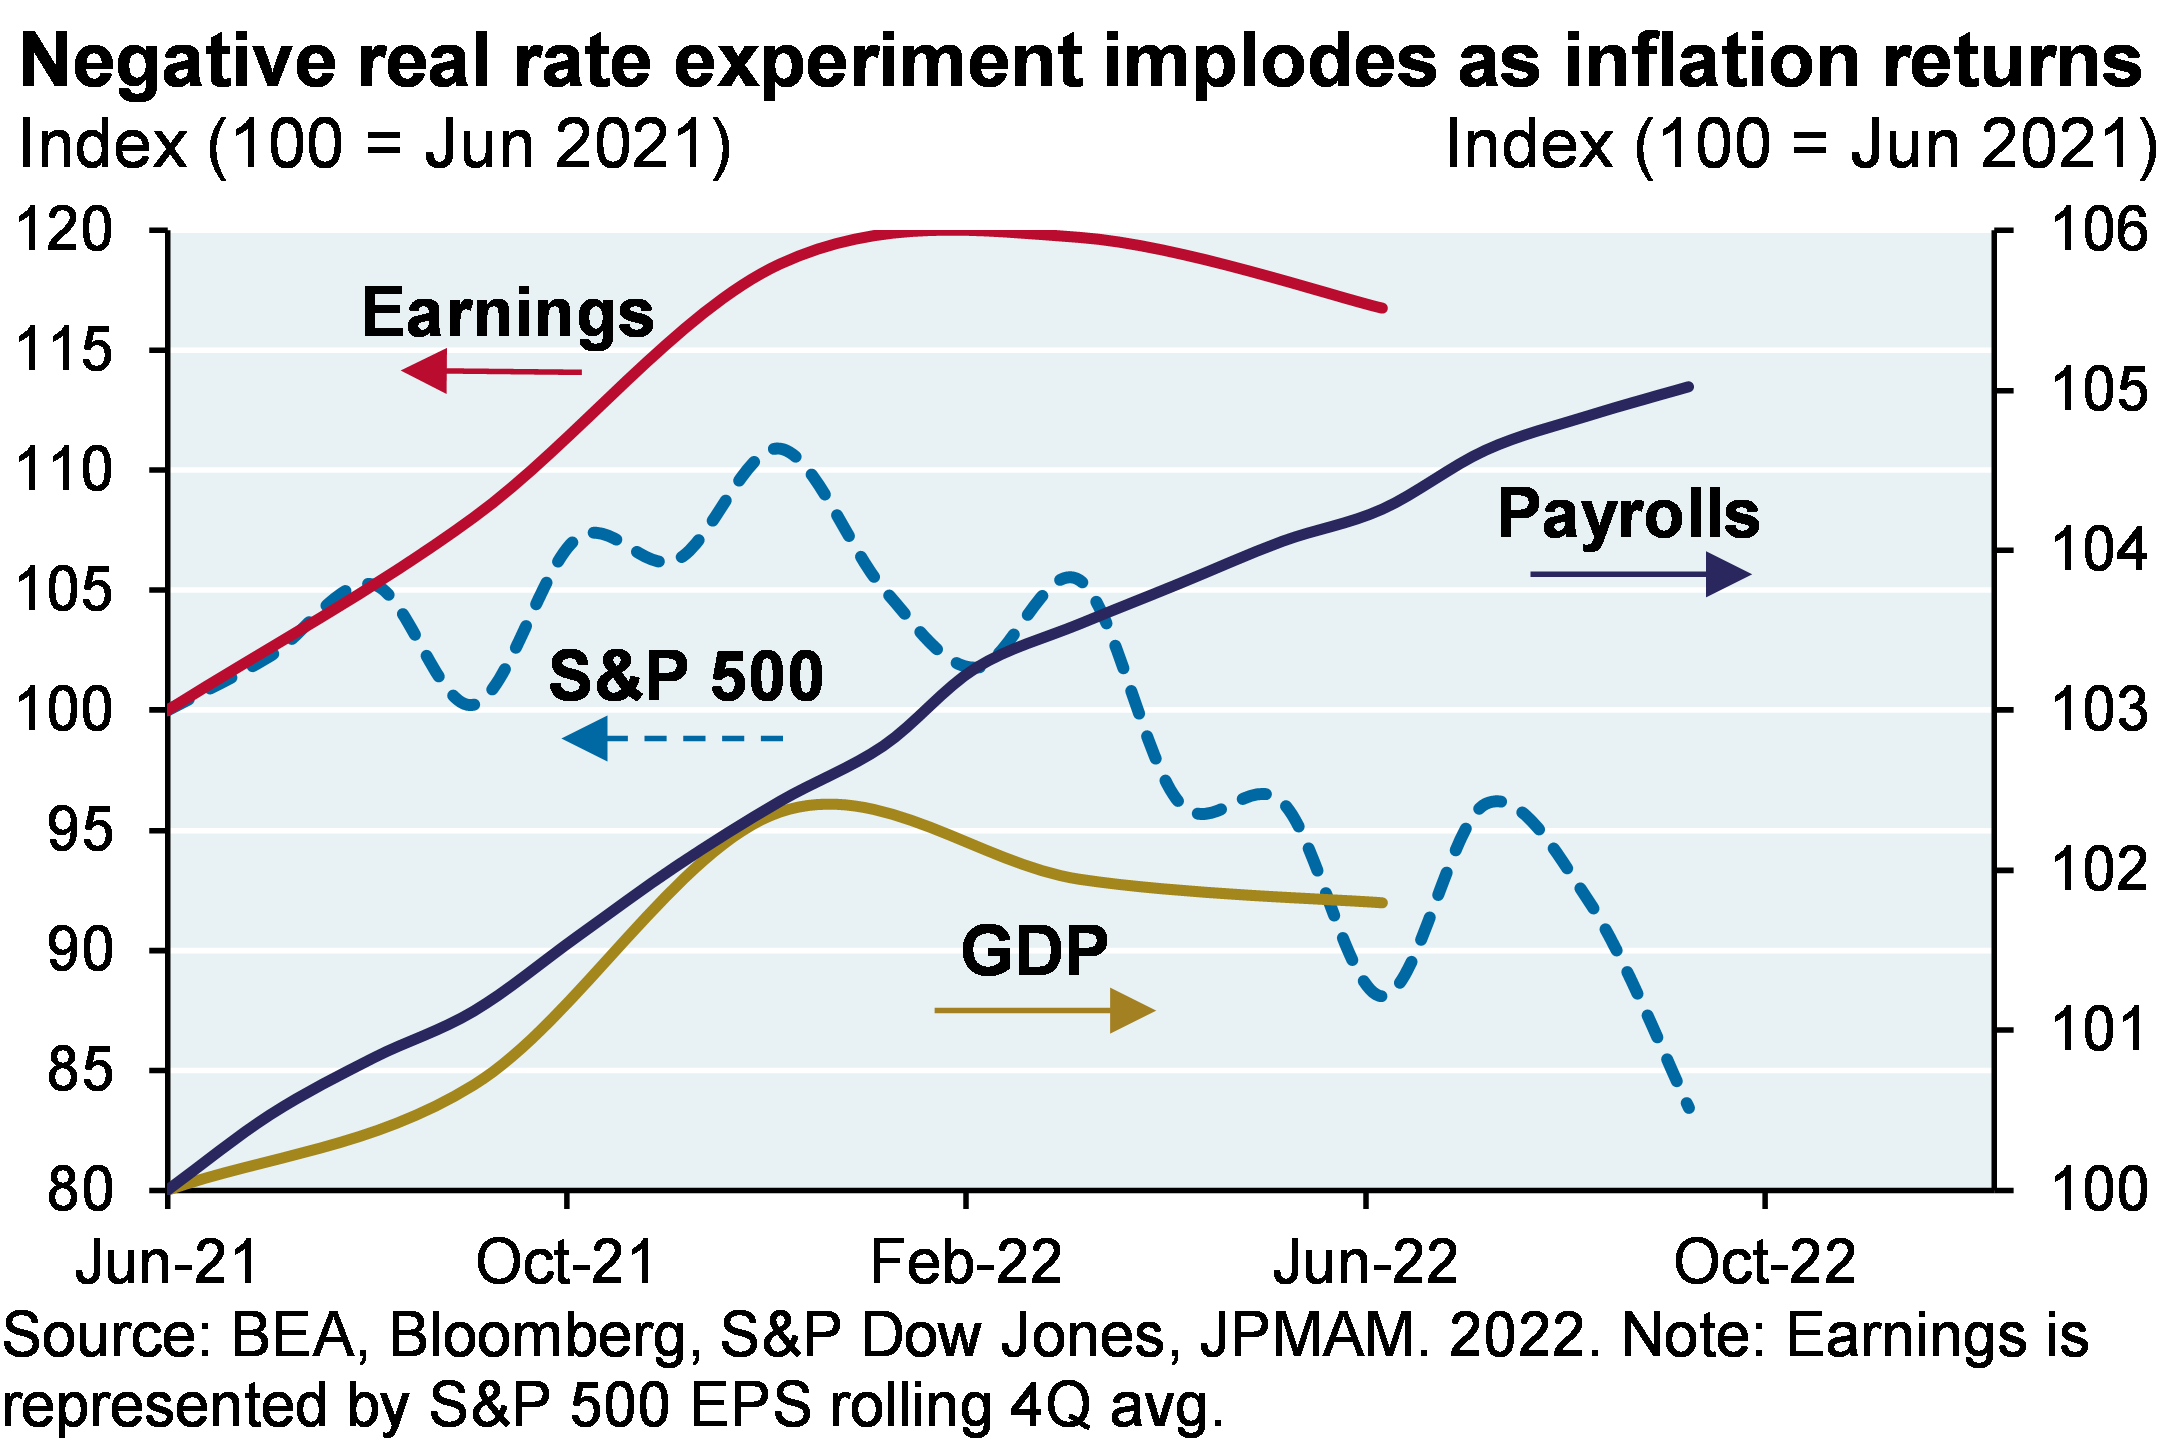 The indexed line chart compares the S&P 500, GDP, Earnings, and Nonfarm Payrolls in our current time period. The S&P 500 is leading the decline, beginning in January 2022, followed by GDP in March 2022 and Earnings in June 2022. Meanwhile, Payrolls are still rising.